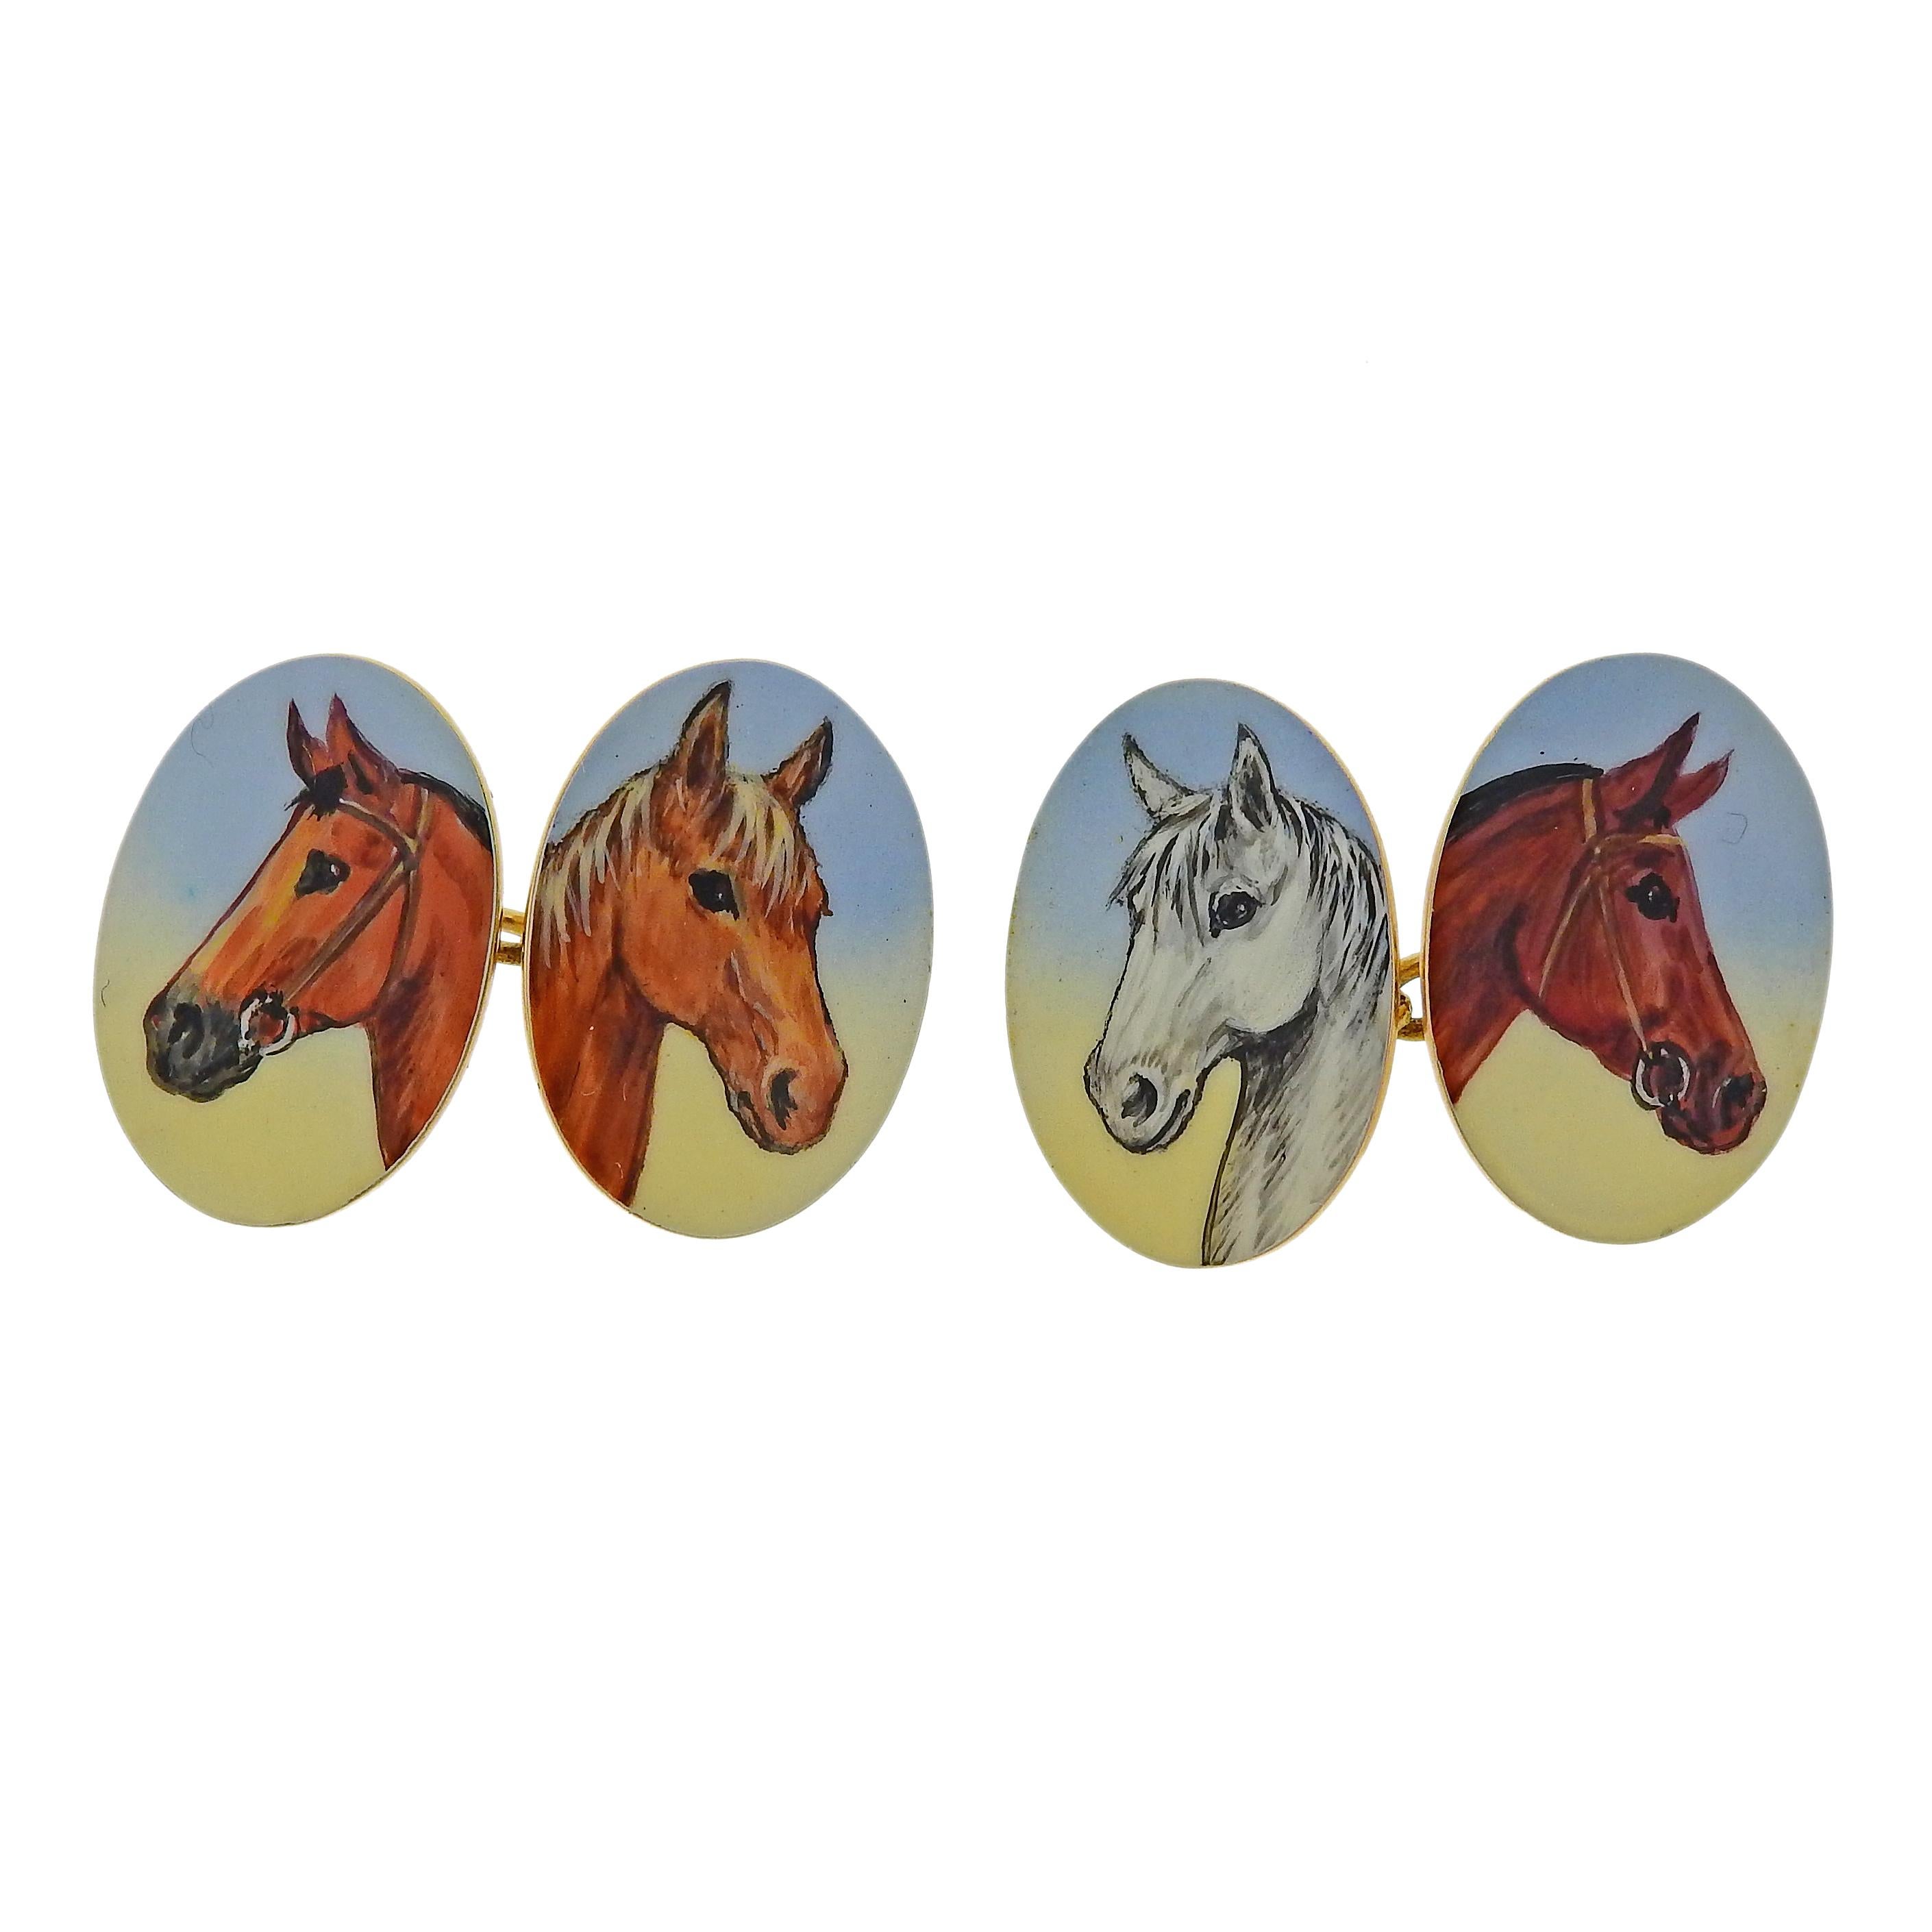 English Enamel Horse Equestrian Gold Cufflinks In Excellent Condition For Sale In New York, NY